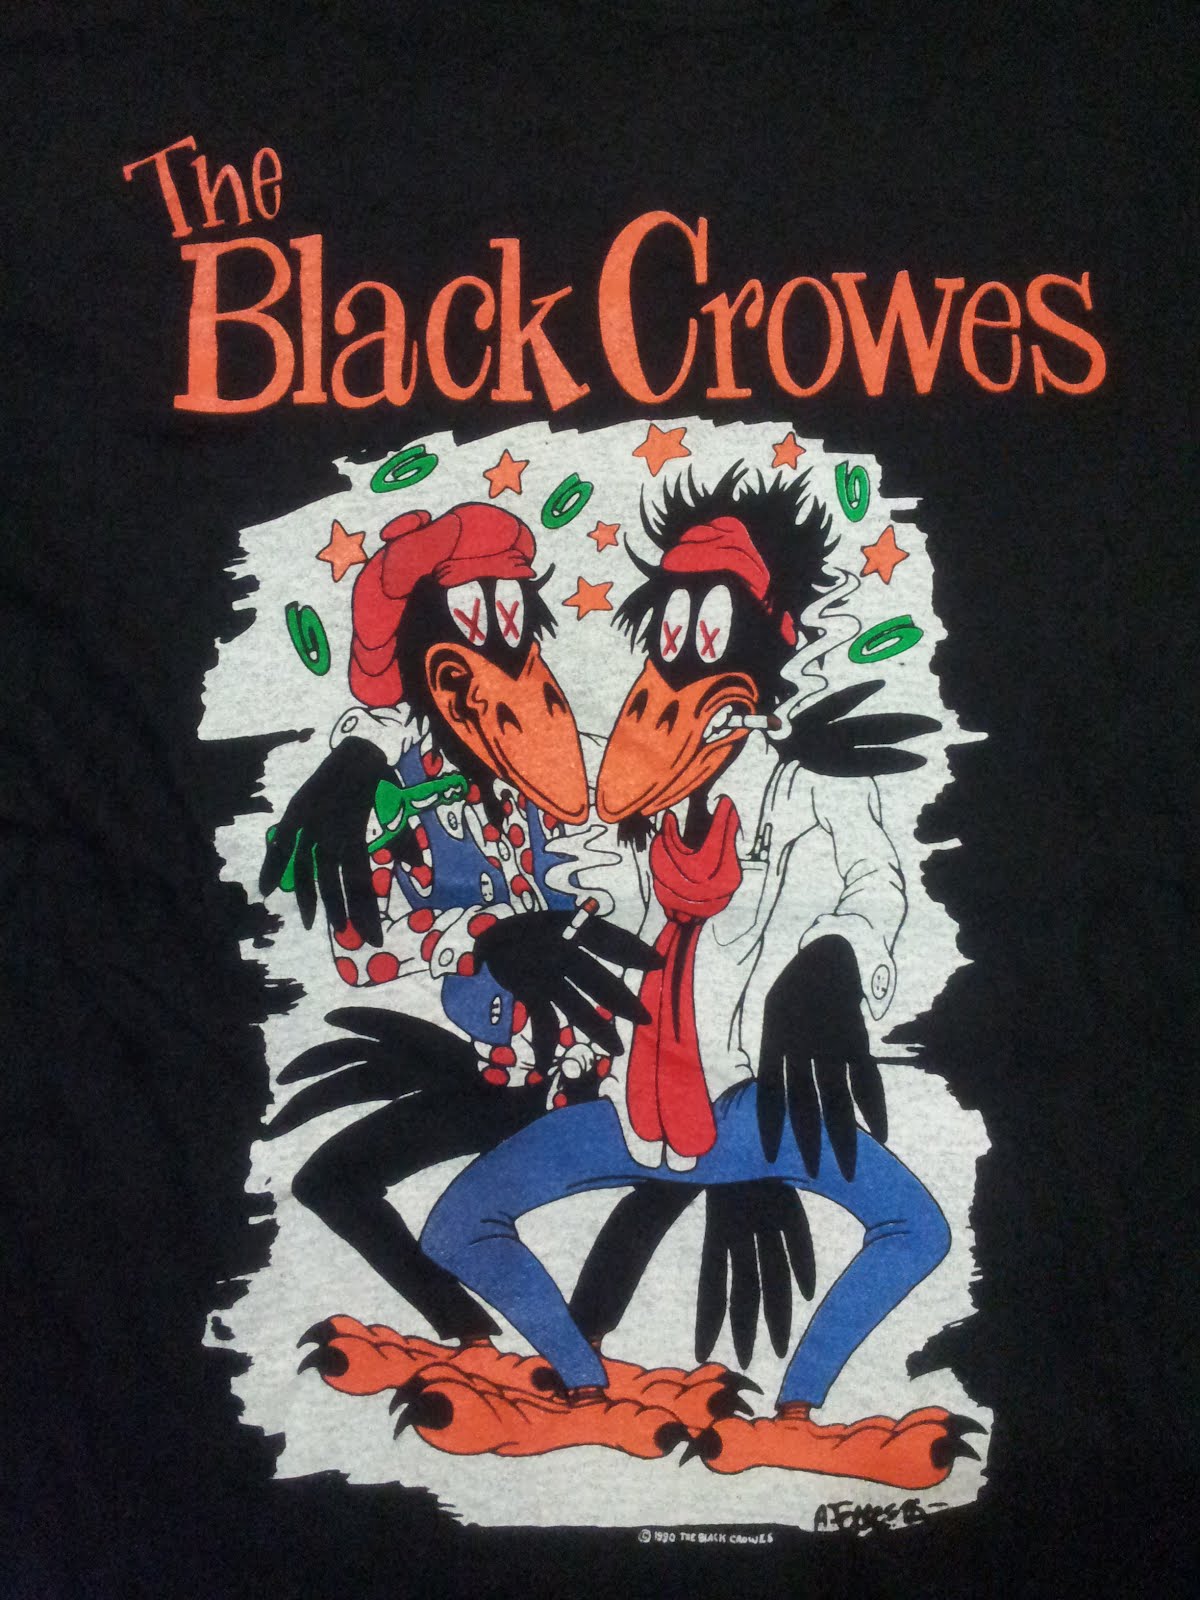 With The Black Crowes